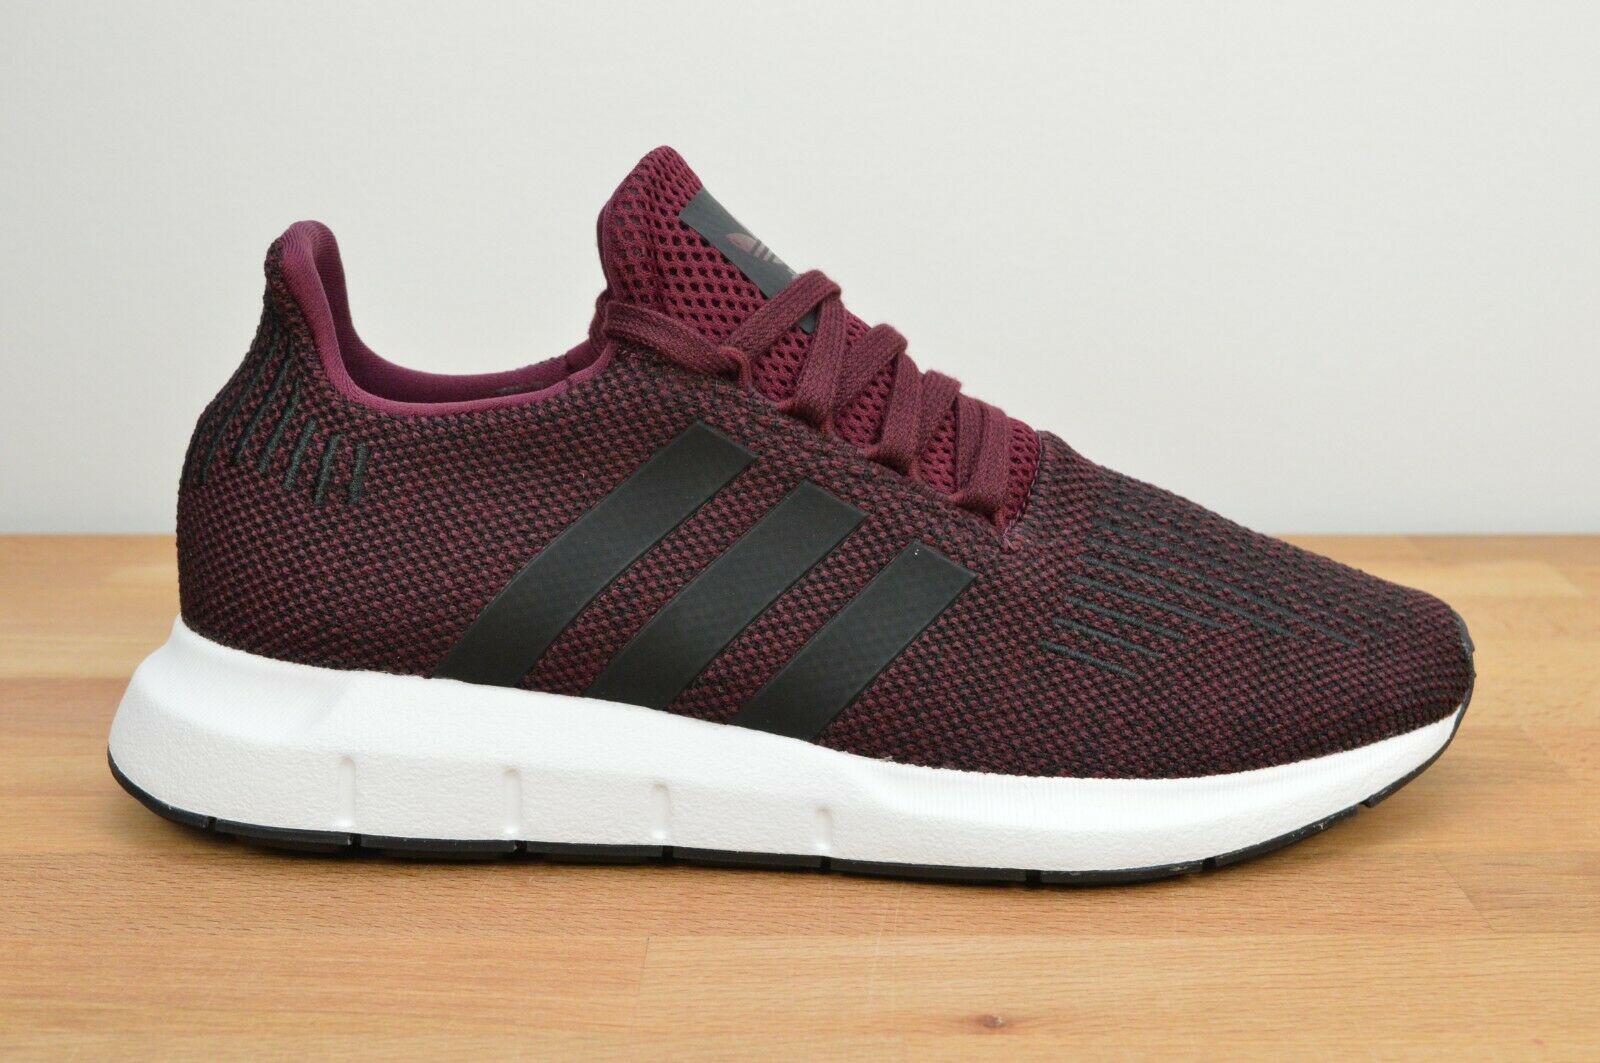 NEW Adidas Swift Run Size 7 Burgundy Maroon Youth Running Sneakers Shoes